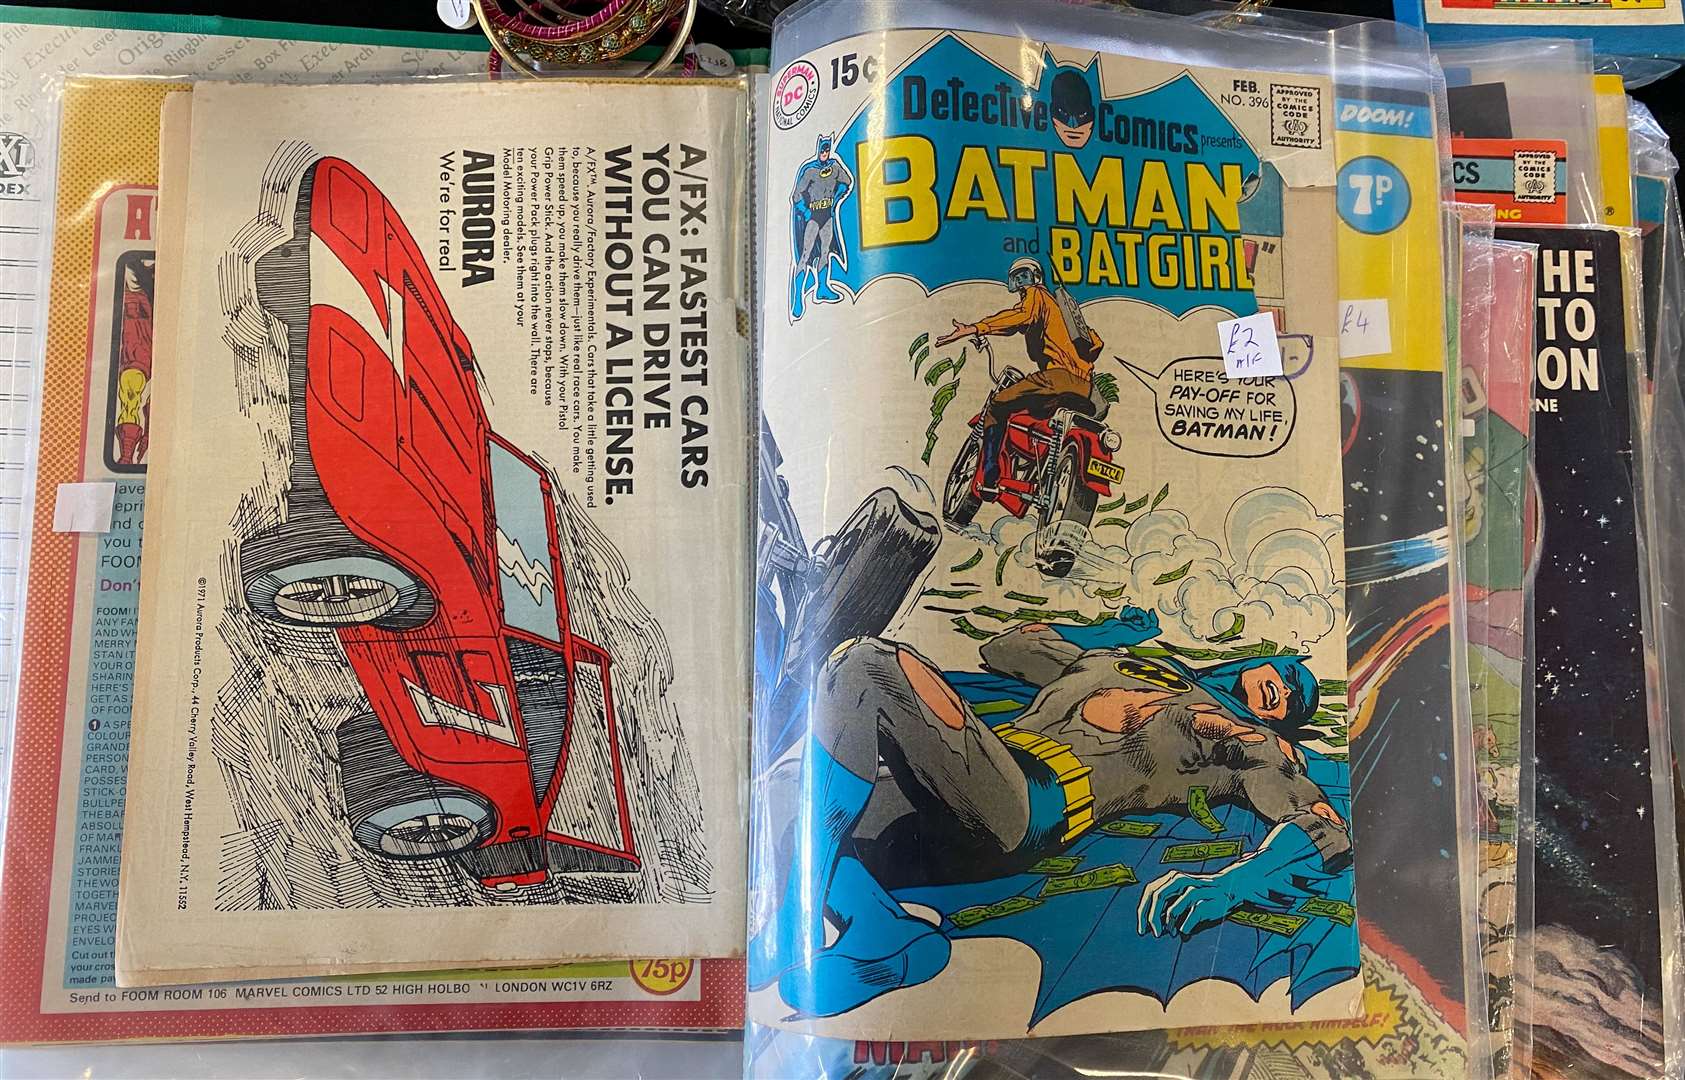 You couldn’t get these comic books for their original price now - this Batman and Batgirl edition went for 15 cents back in the day